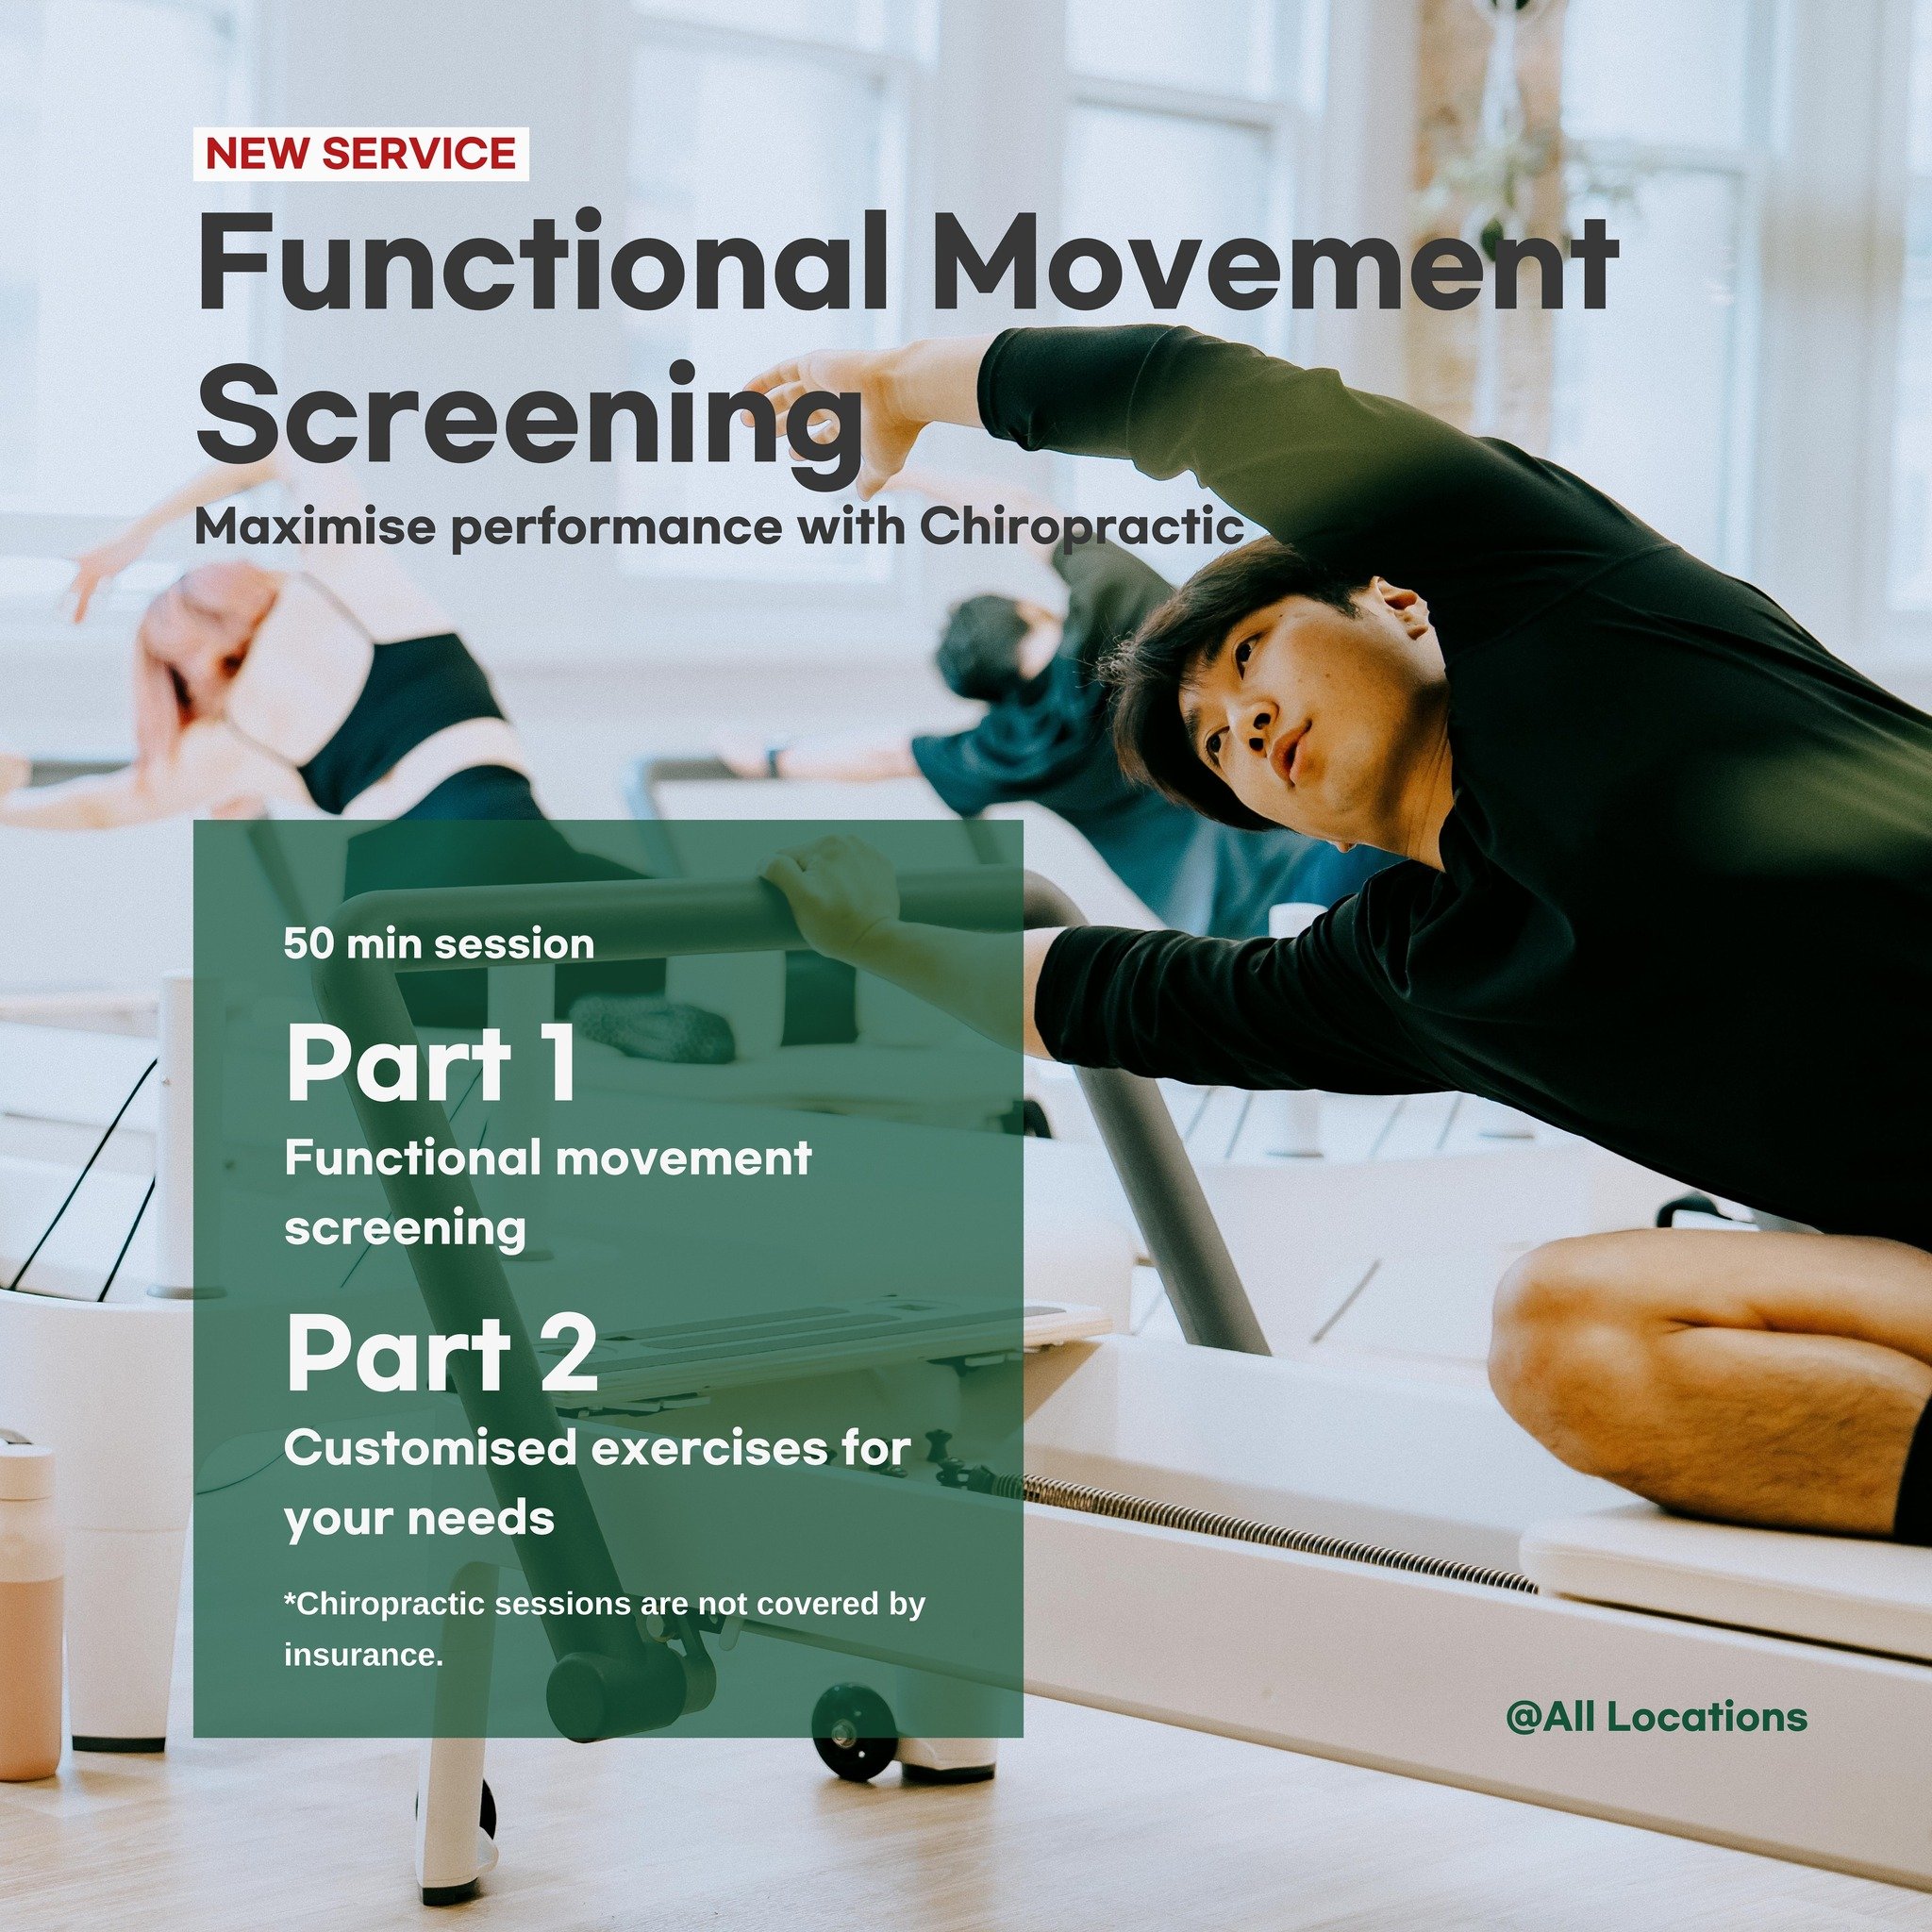 🚀 Launch into wellness with our NEW SERVICE: Functional Movement Screening, now available at all locations!

🌟 Maximize your potential with a comprehensive movement assessment:

🌀 Part 1: Dive into Functional Movement Screening and enhance your pe